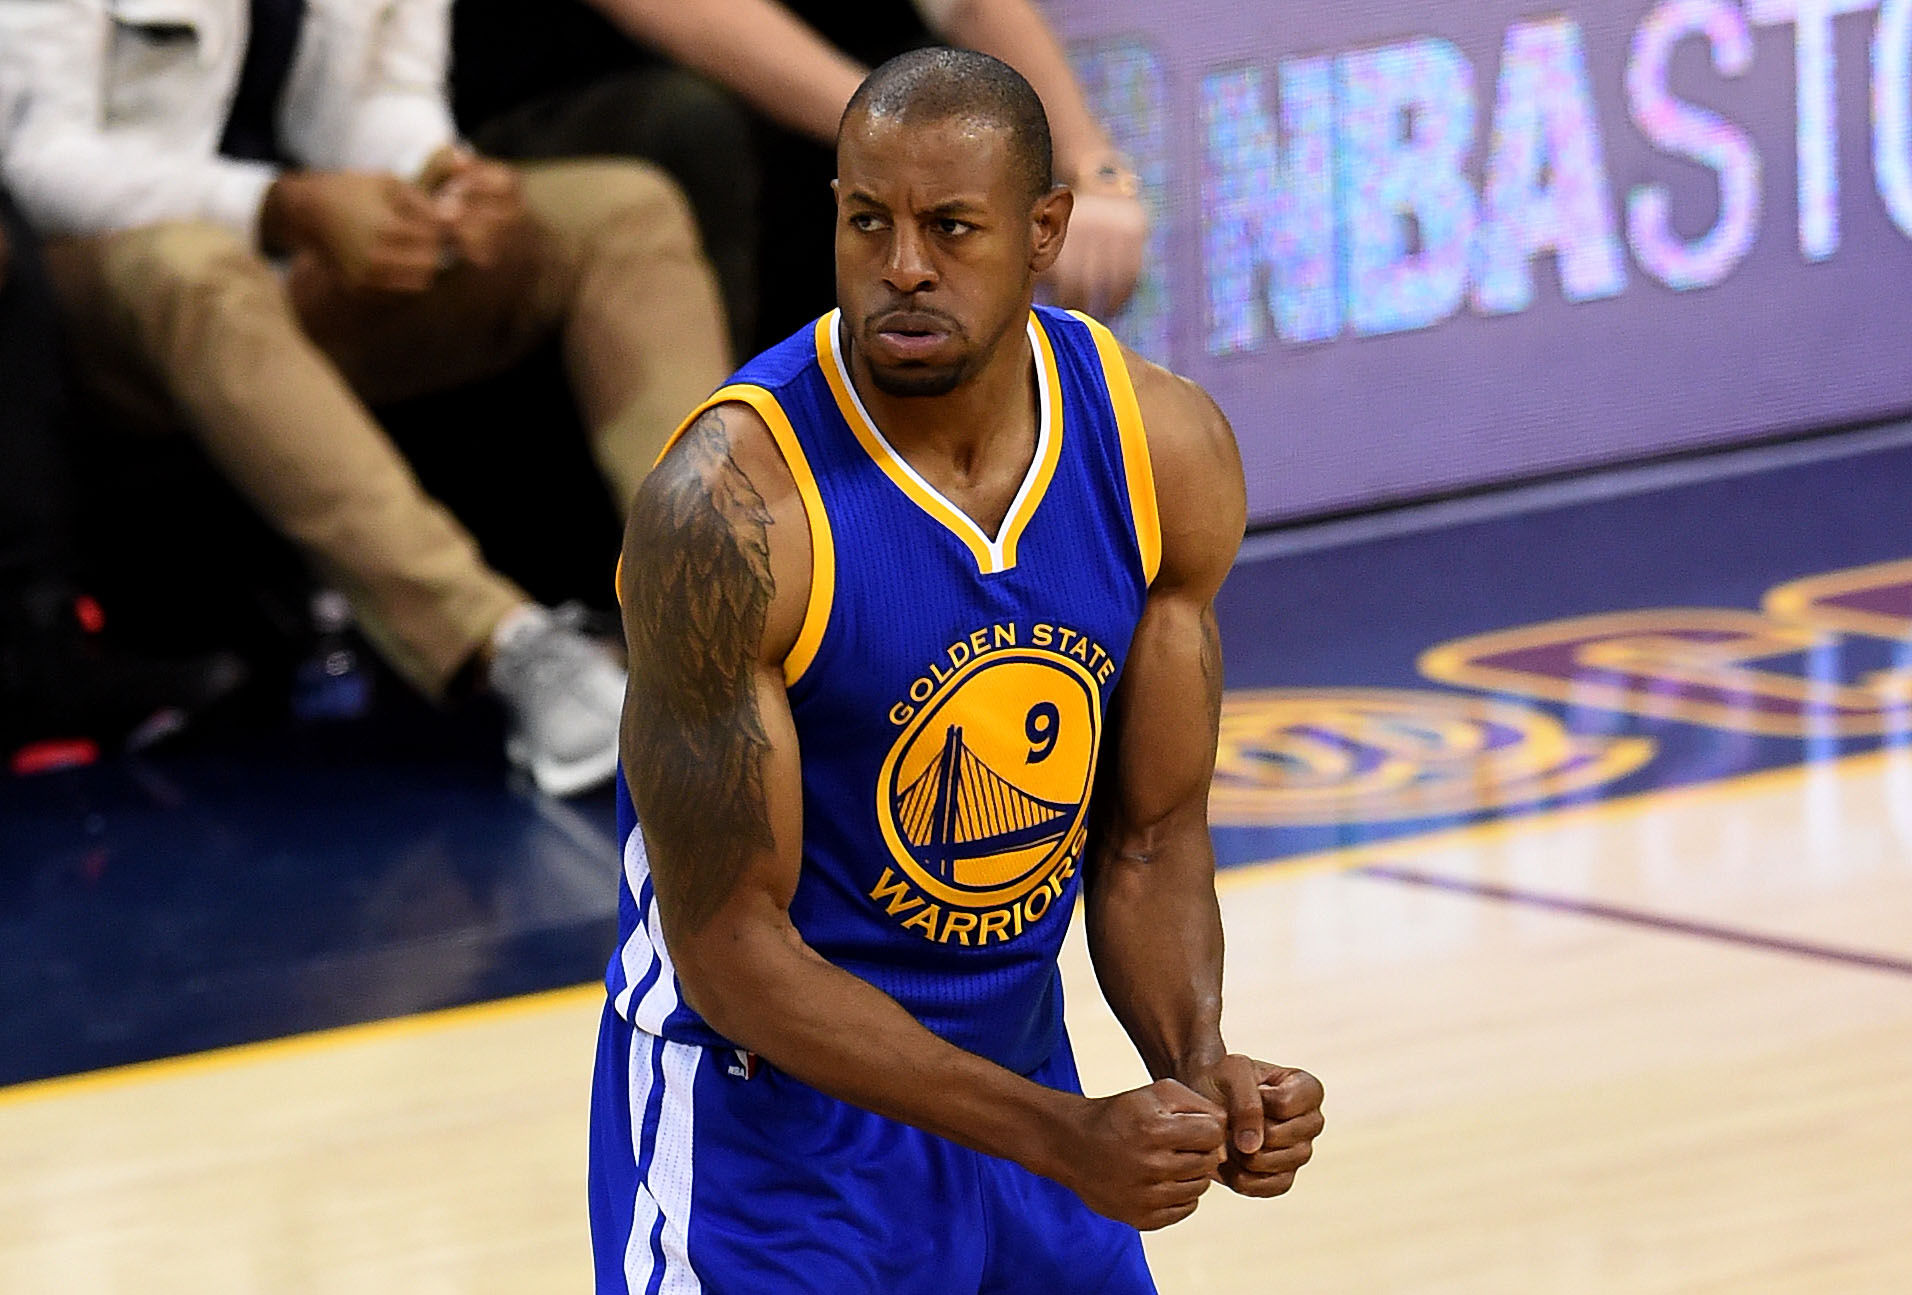 PHOTO: Andre Iguodala of the Golden State Warriors reacts in the fourth quarter against the Cleveland Cavaliers during Game Six of the 2015 NBA Finals at Quicken Loans Arena on June 16, 2015 in Cleveland, Ohio.